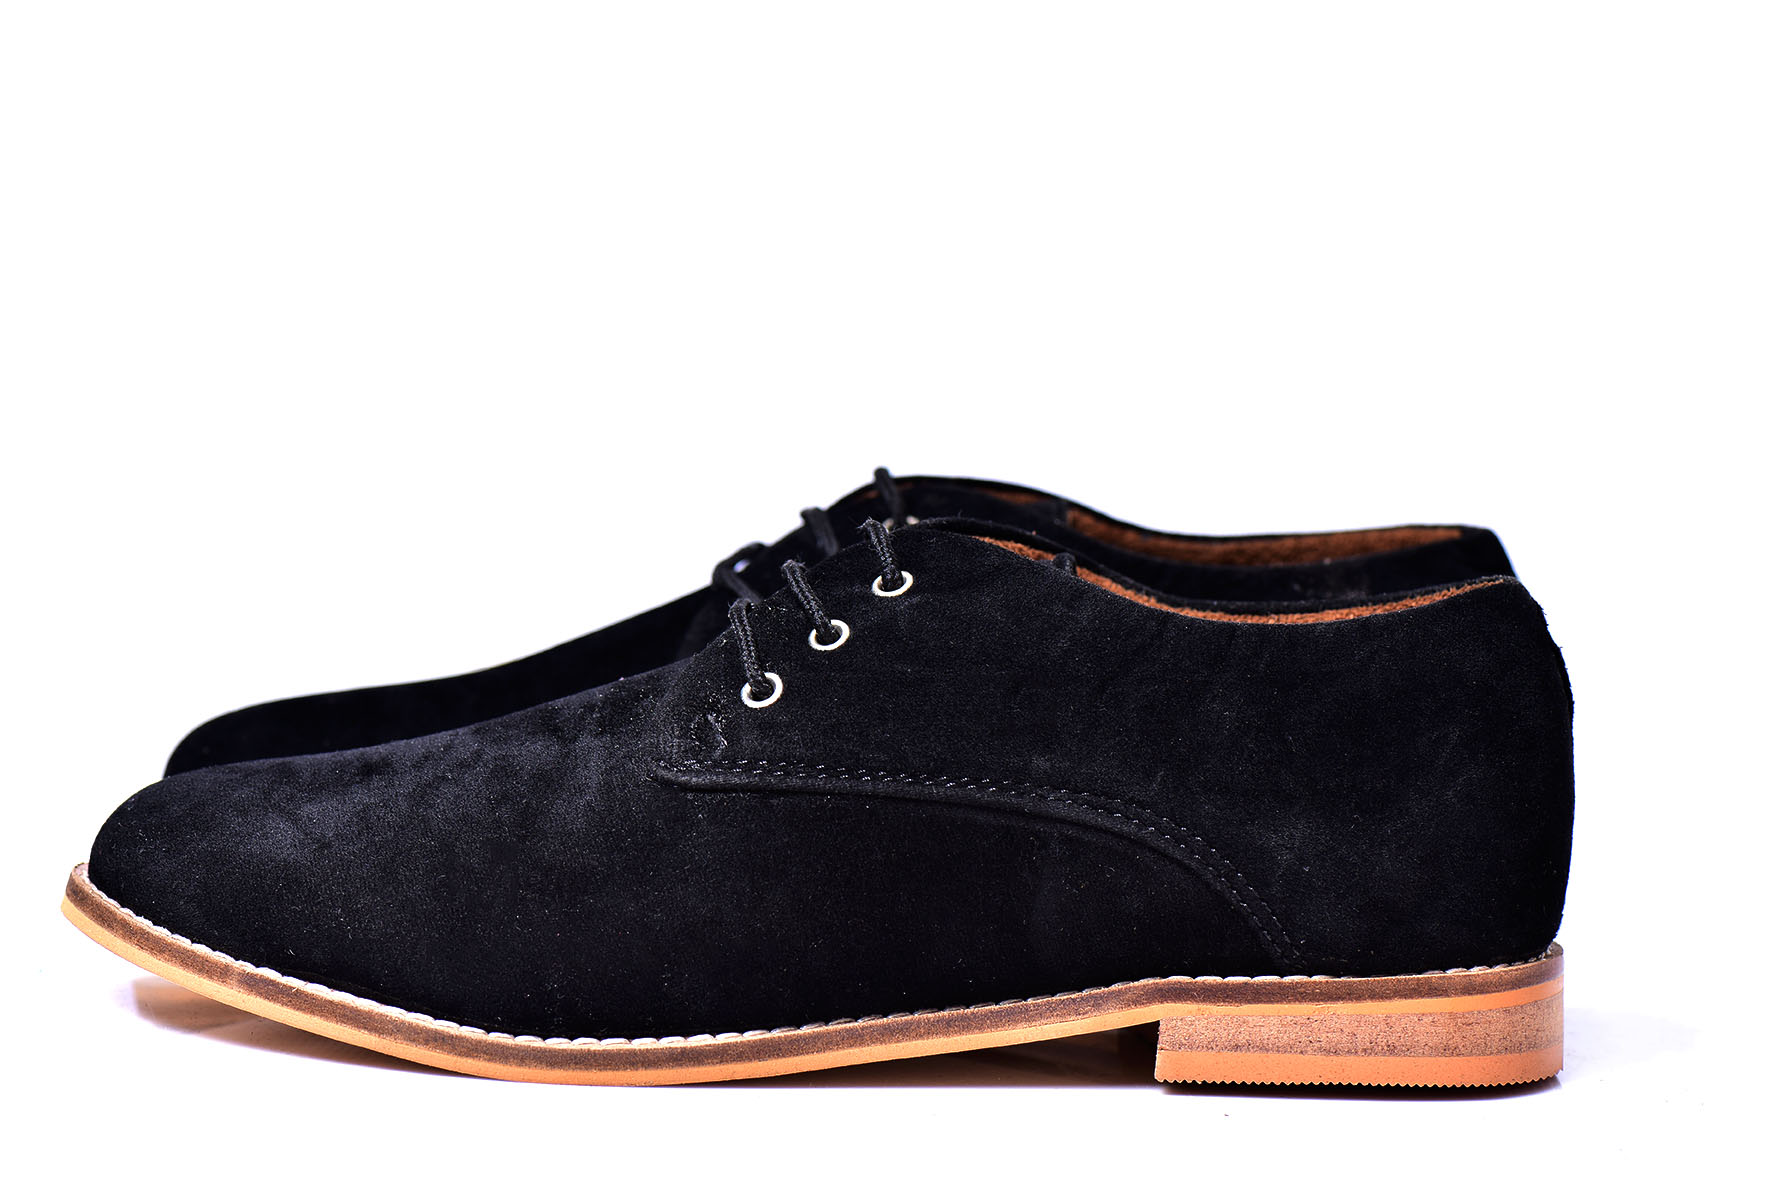 Black shoe with brown sole - Street Style Store